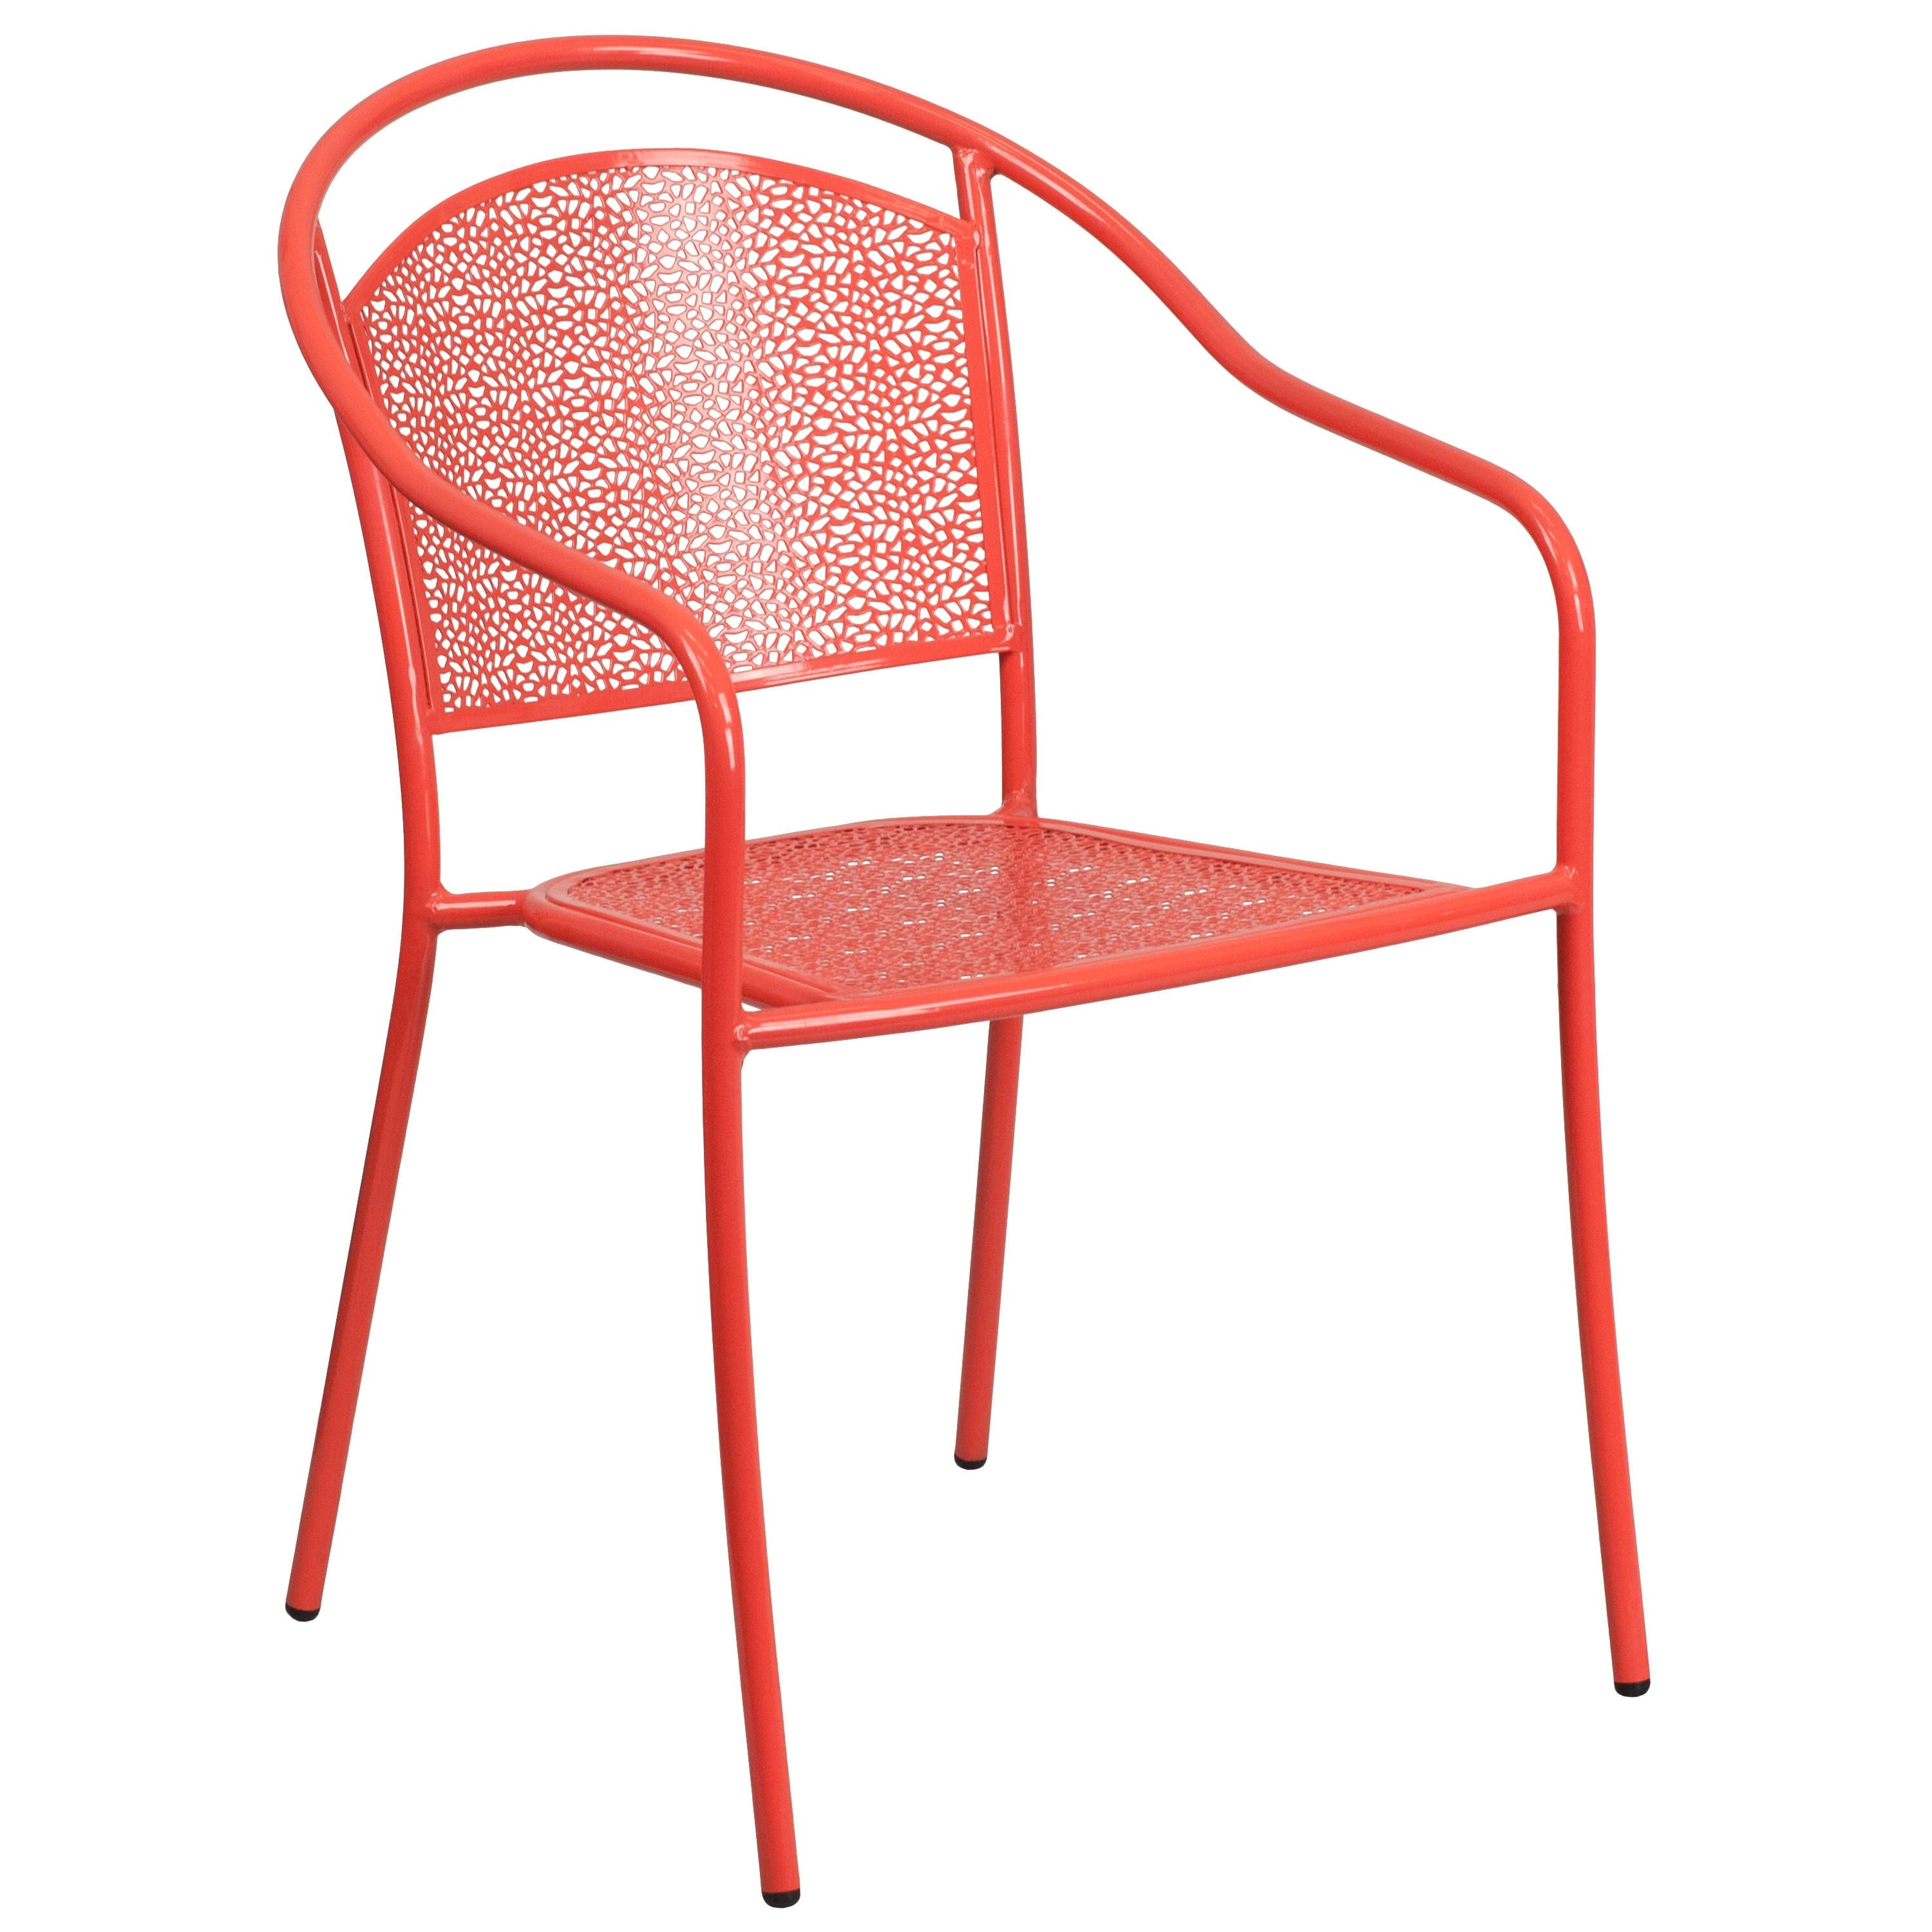 Cora Ii Arm Chairs Within 2018 Flash Furniture Coral Indoor Outdoor Patio Arm Chair With Round Back (View 20 of 20)